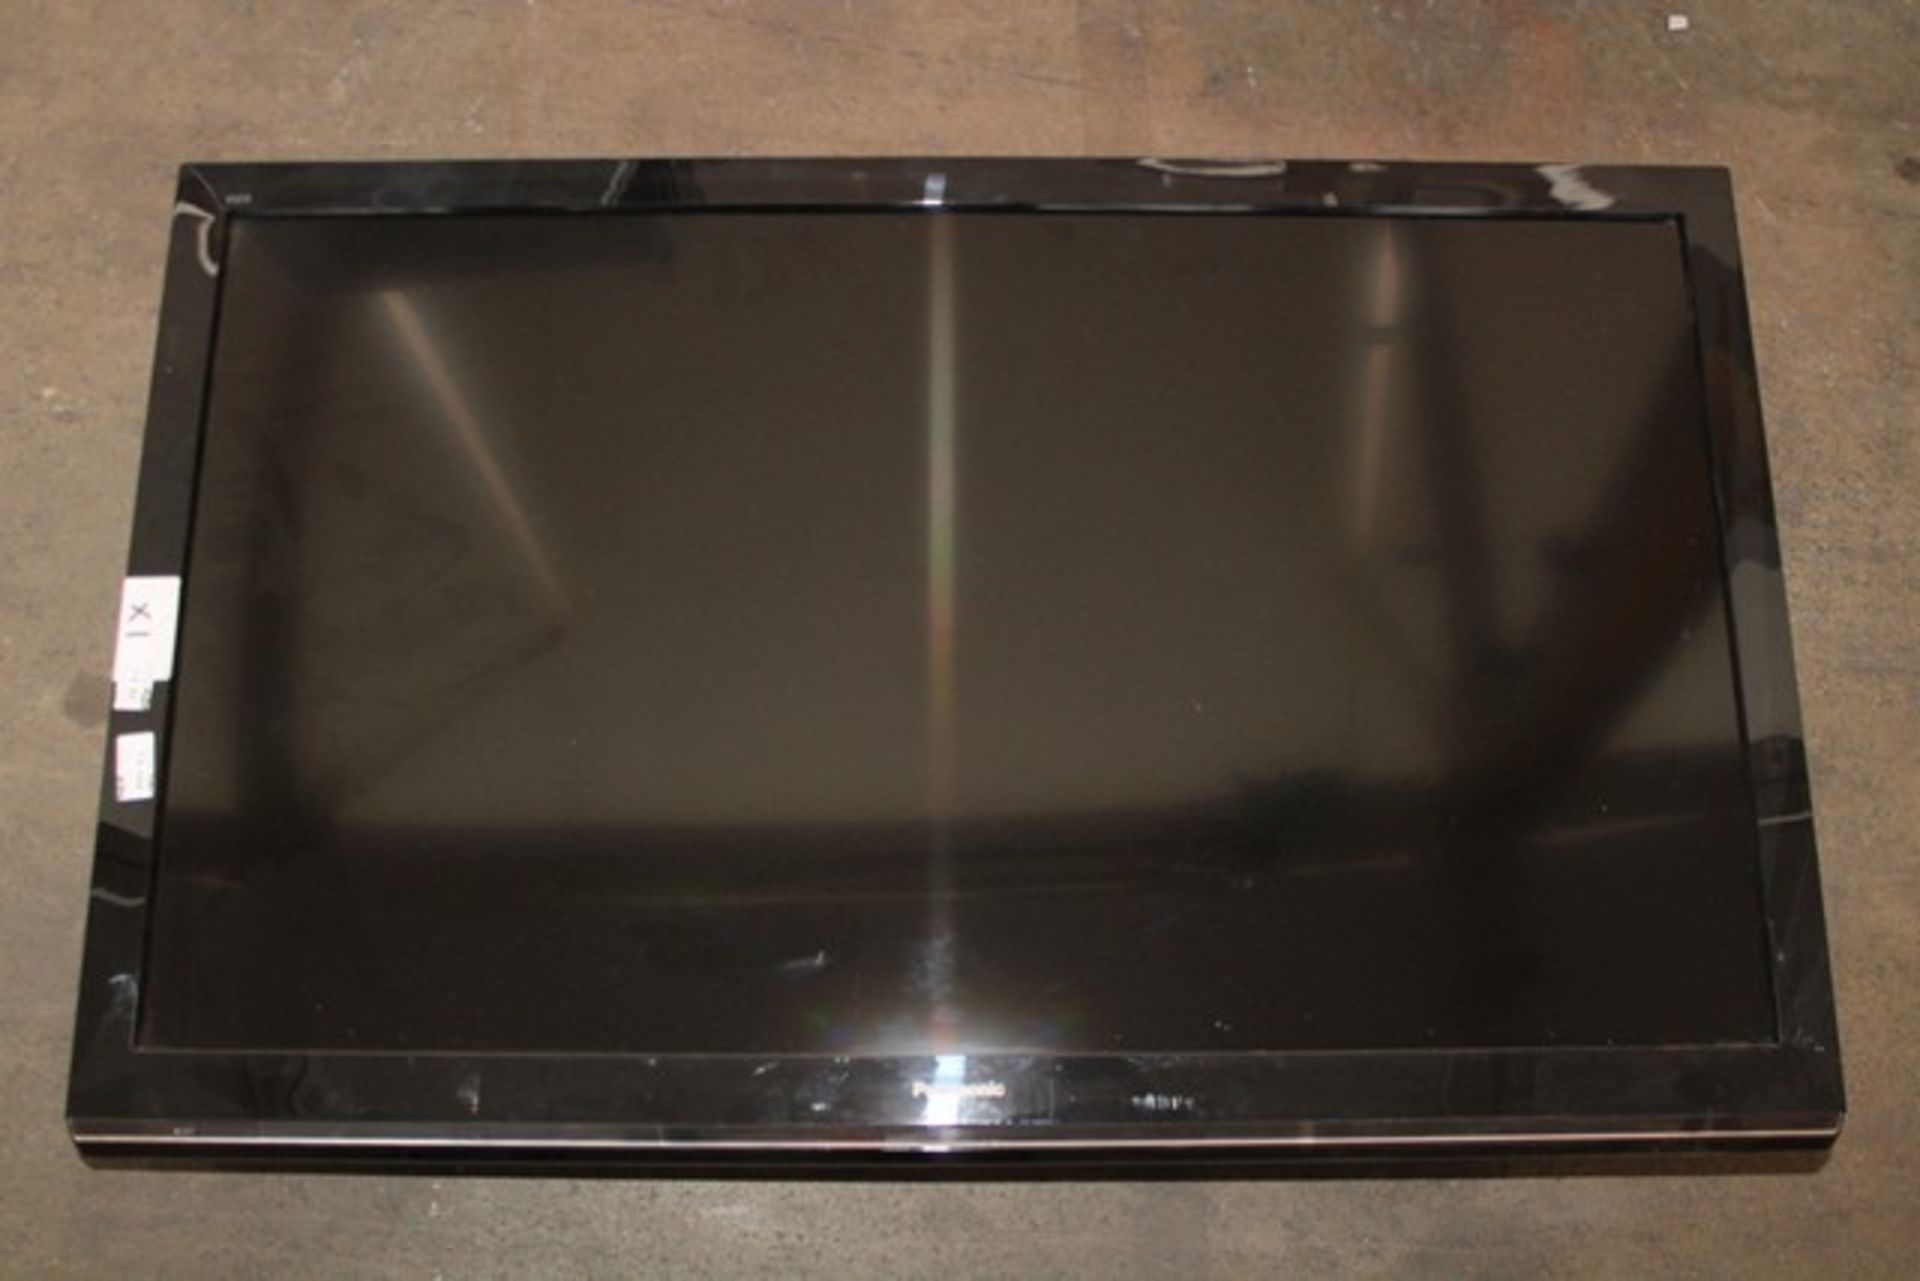 ONE PANASONIC VIERA HDMI READY TV WITH BUILT FREEVIEW AND FITTED WALL MOUNT (CATERING)